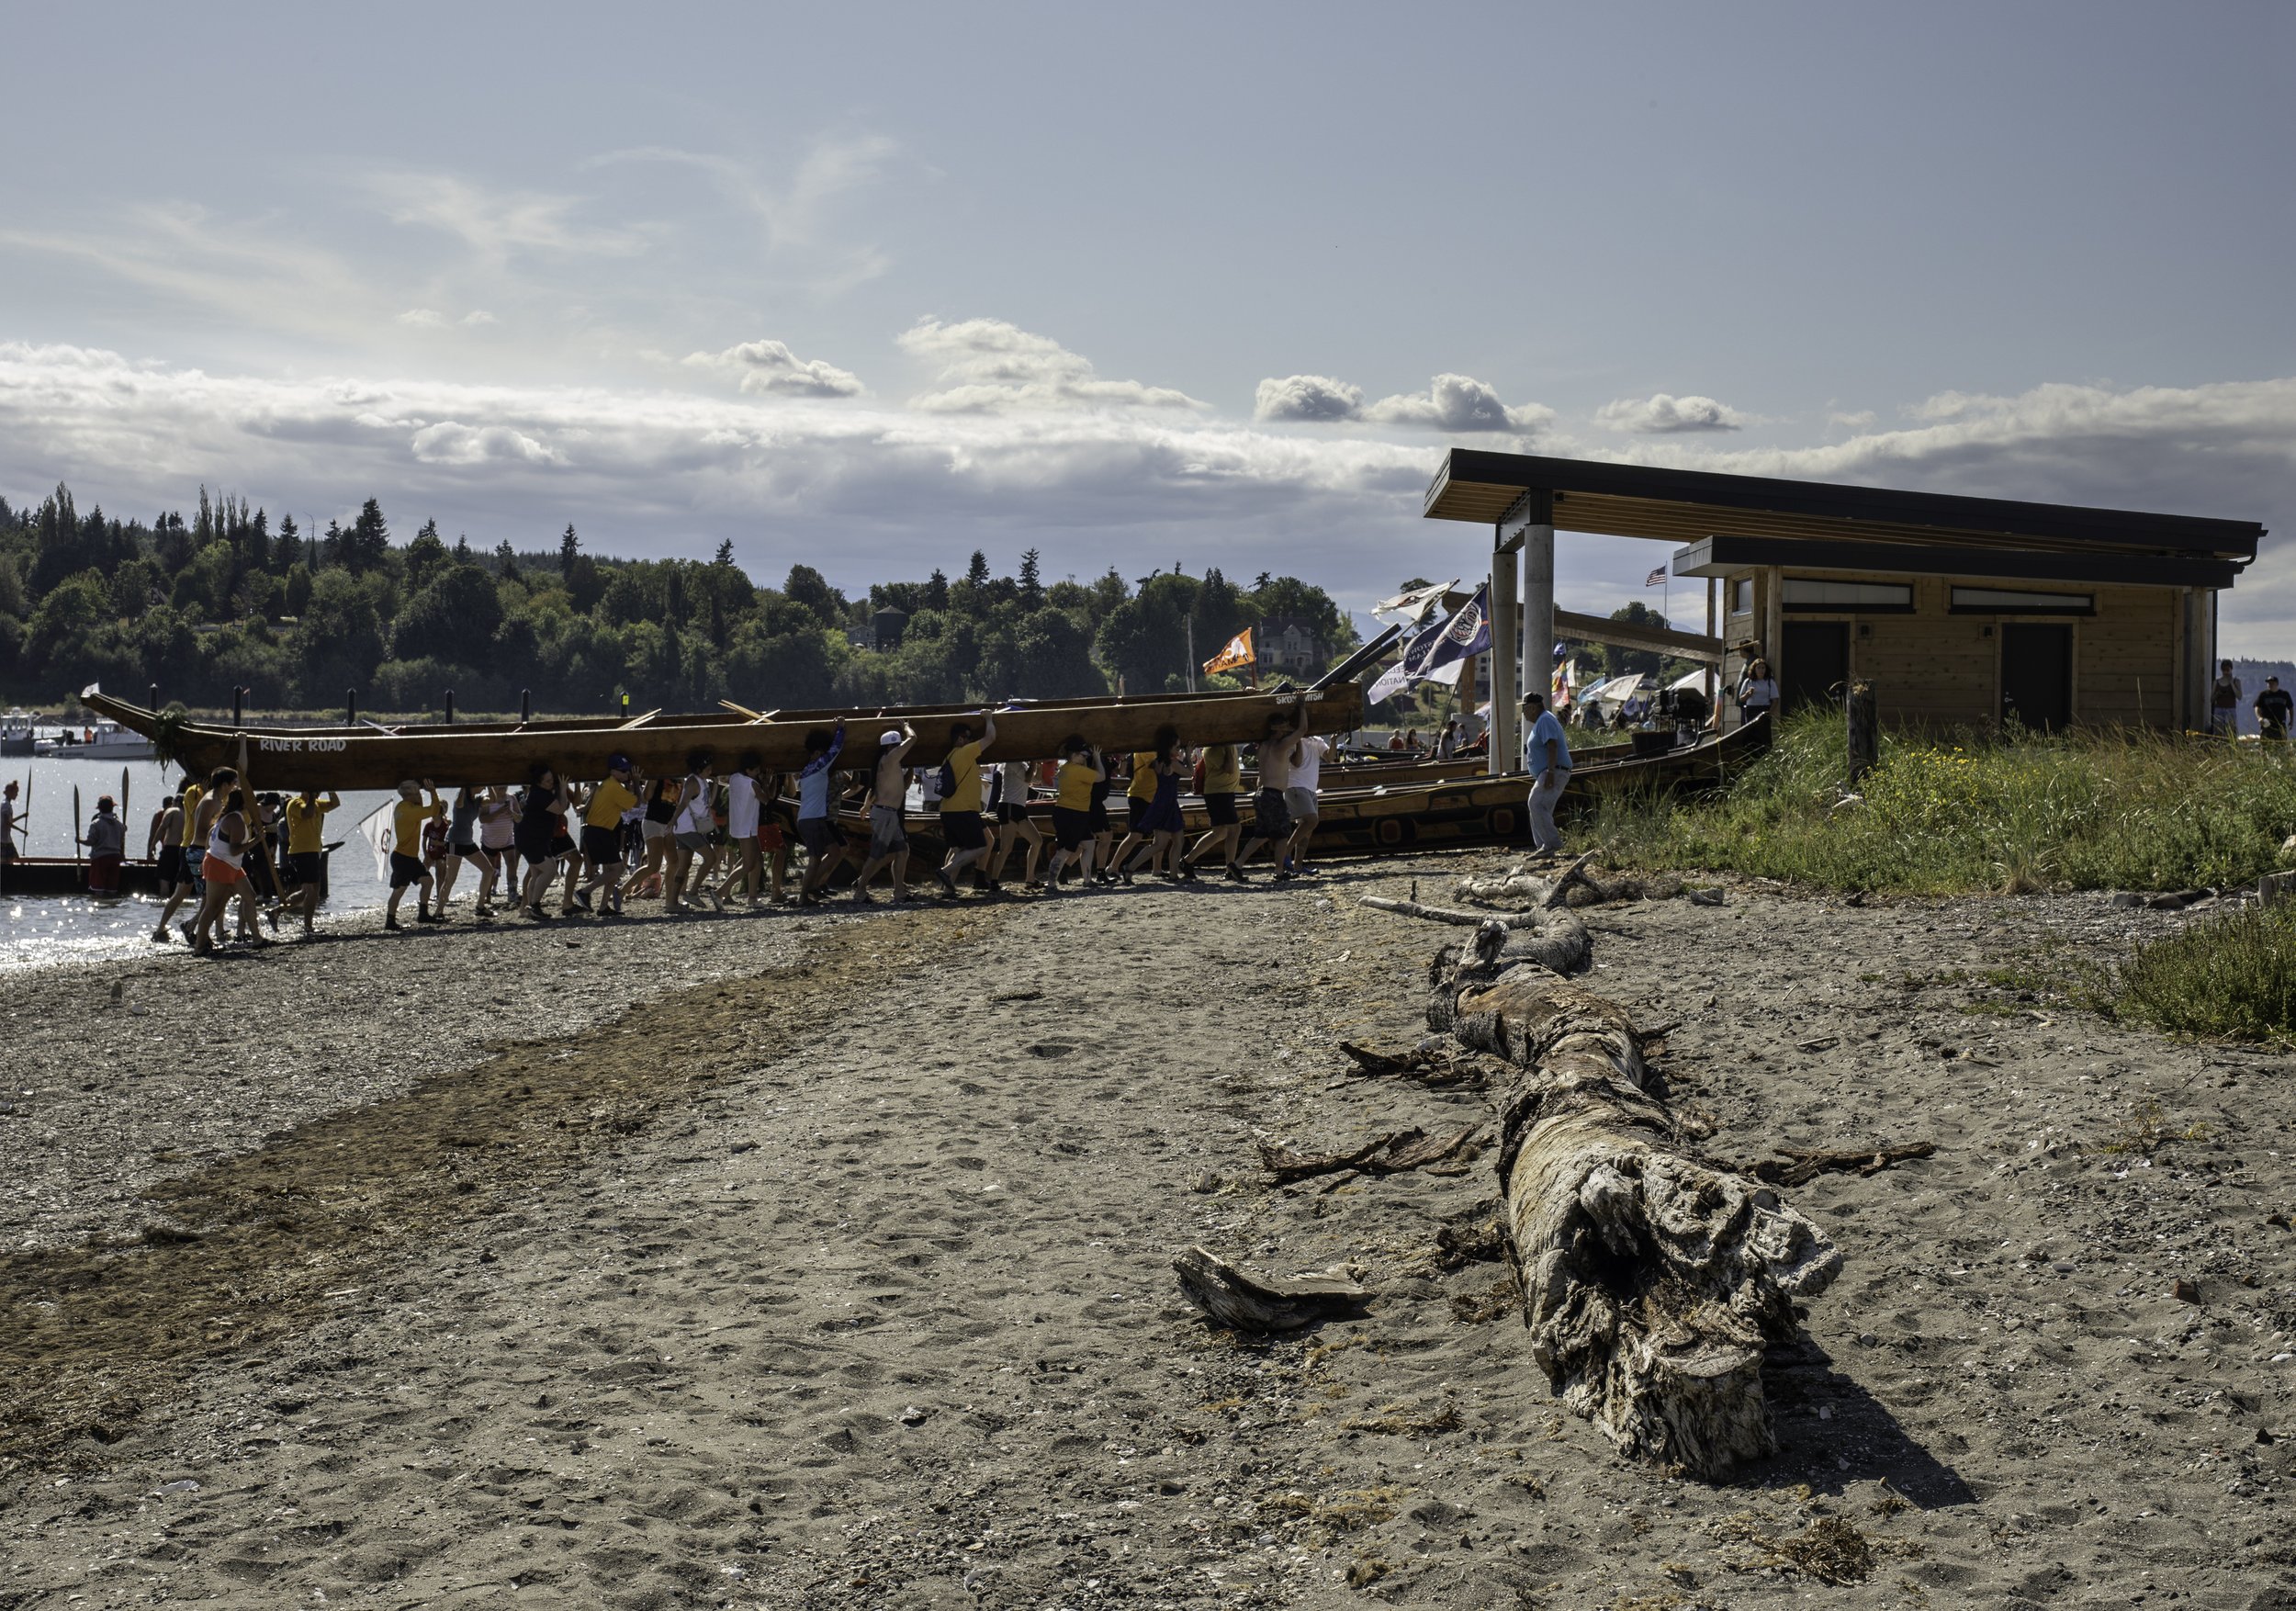  Located on land occupied by the tribe since time immemorial, the Port Gamble S’Klallam Tribe’s Hatchery combines pragmatic uses with symbolic content—the fishery is central to both the Tribe’s traditional identity and its contemporary outlook.  The 